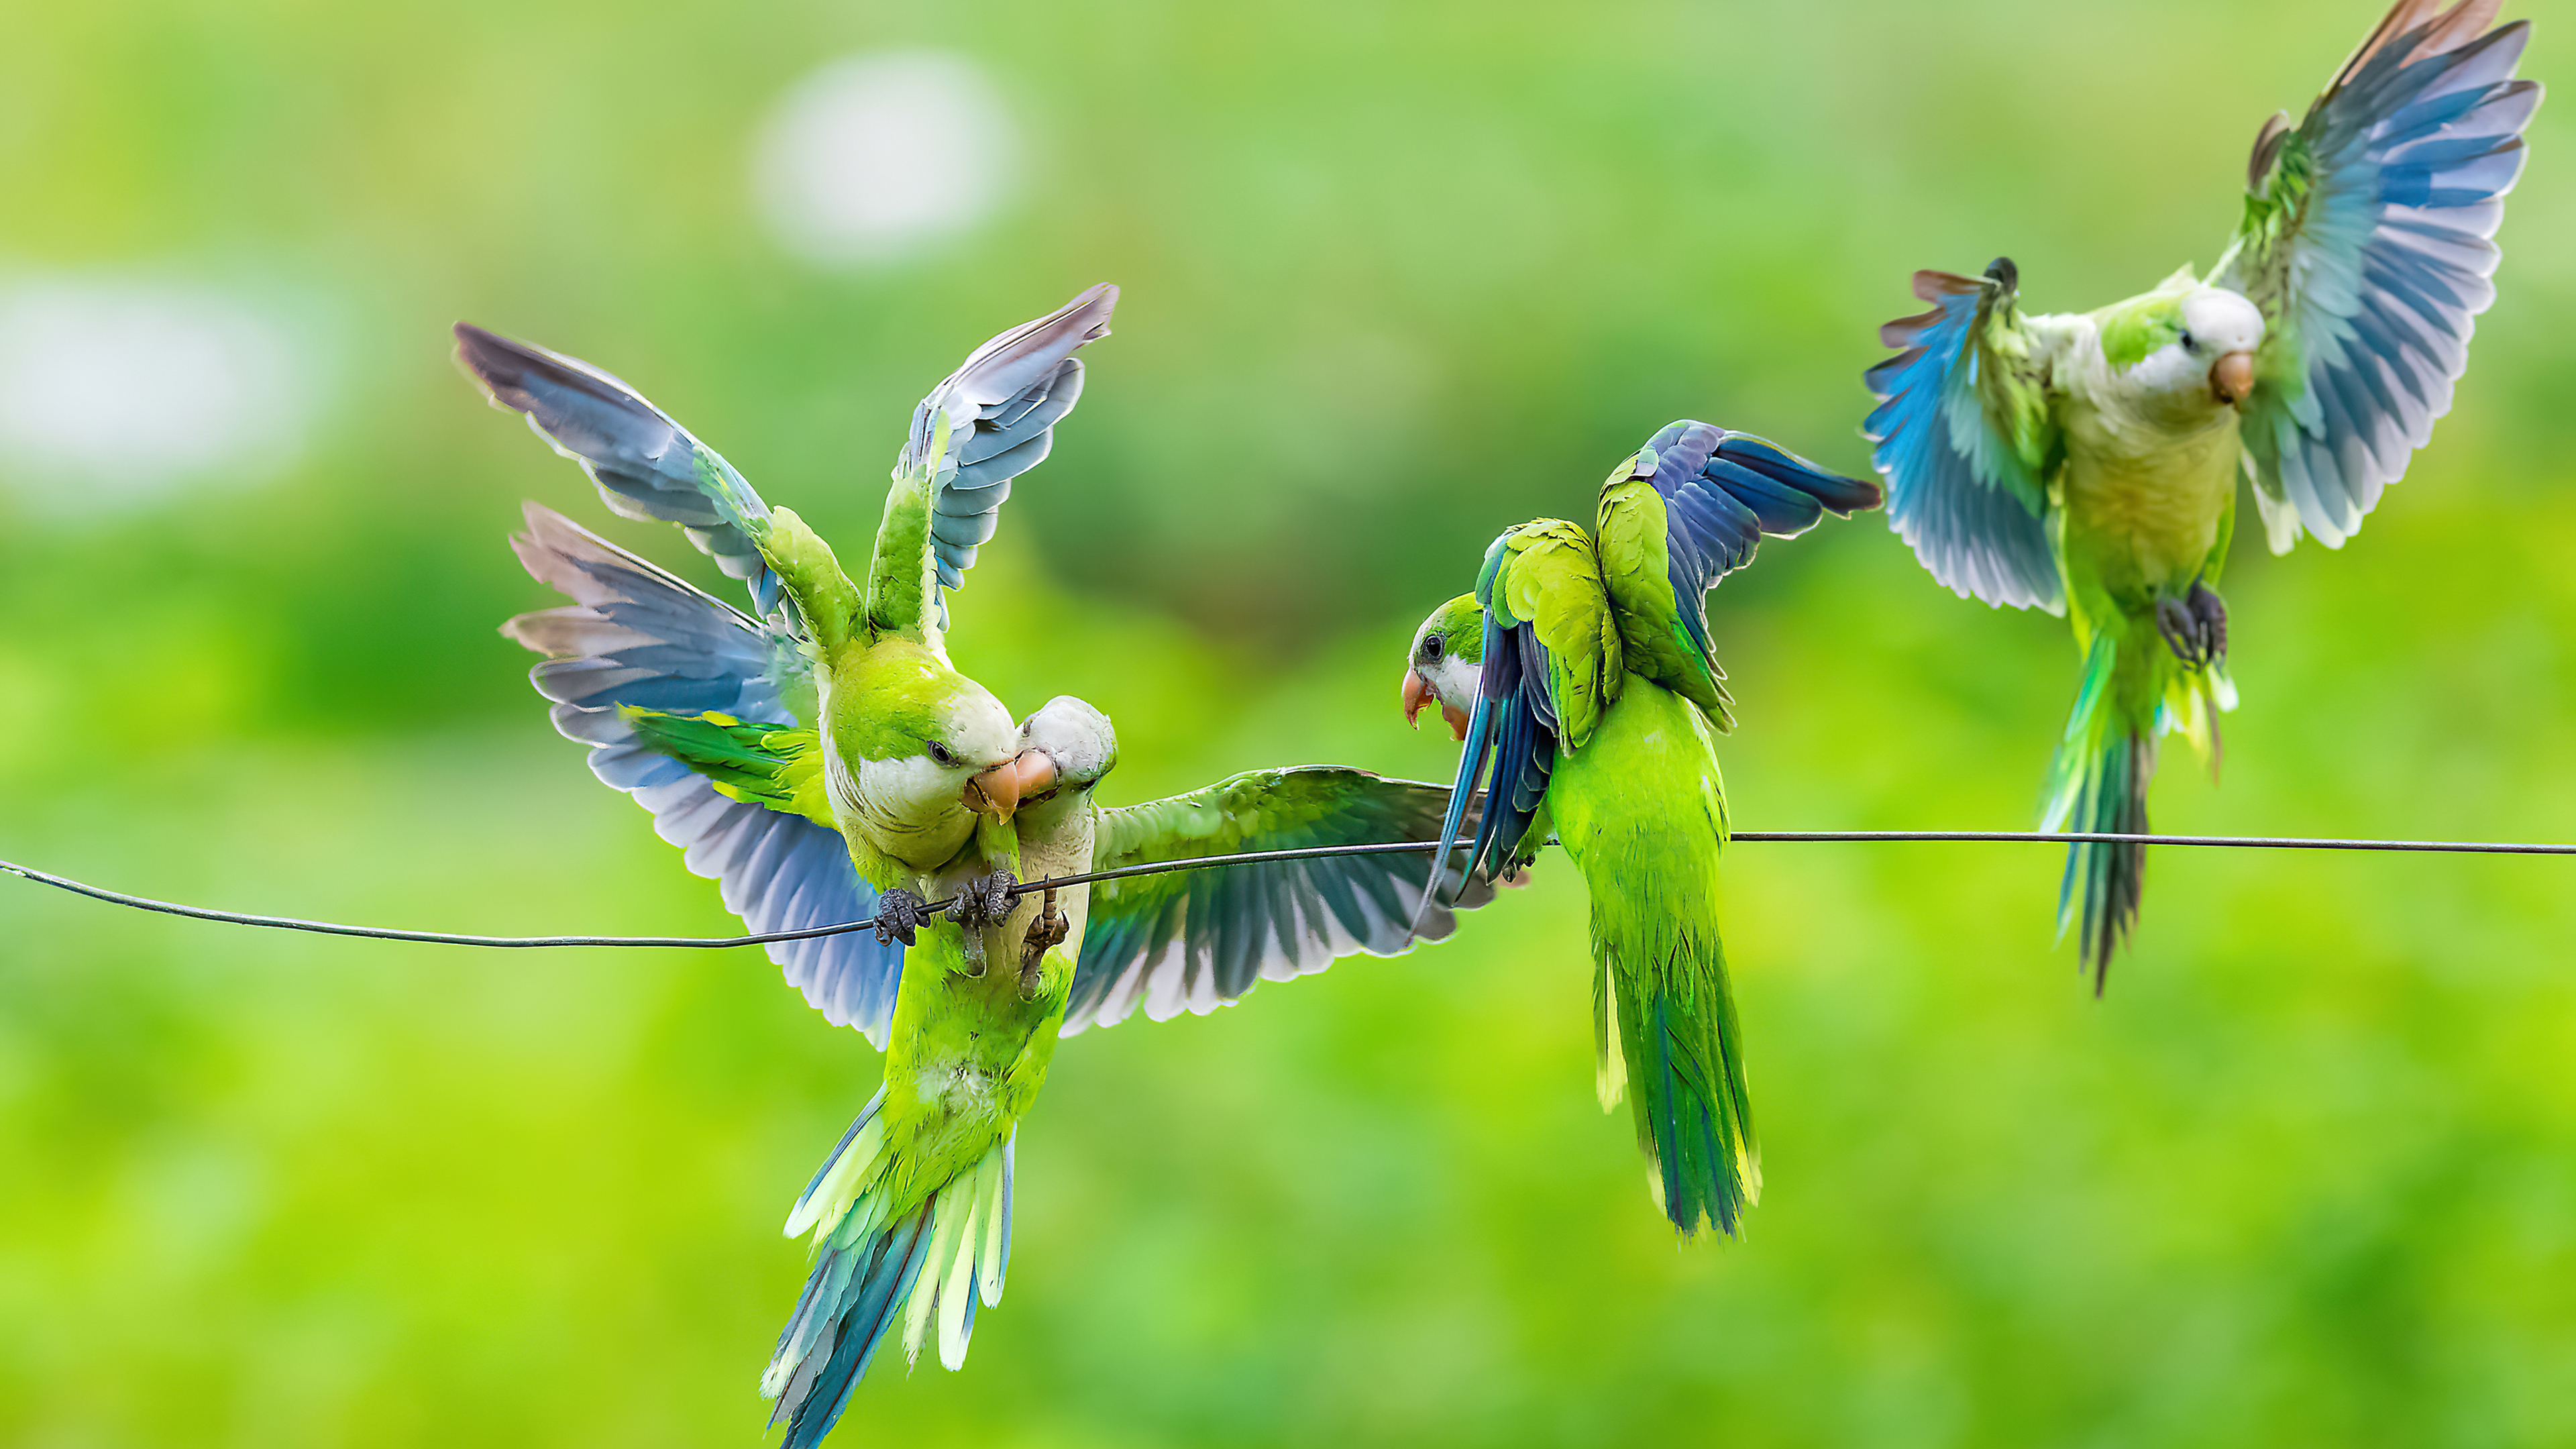 3840x2160 Monk Parrots 4k HD 4k Wallpapers, Images, Backgrounds, Photos and  Pictures